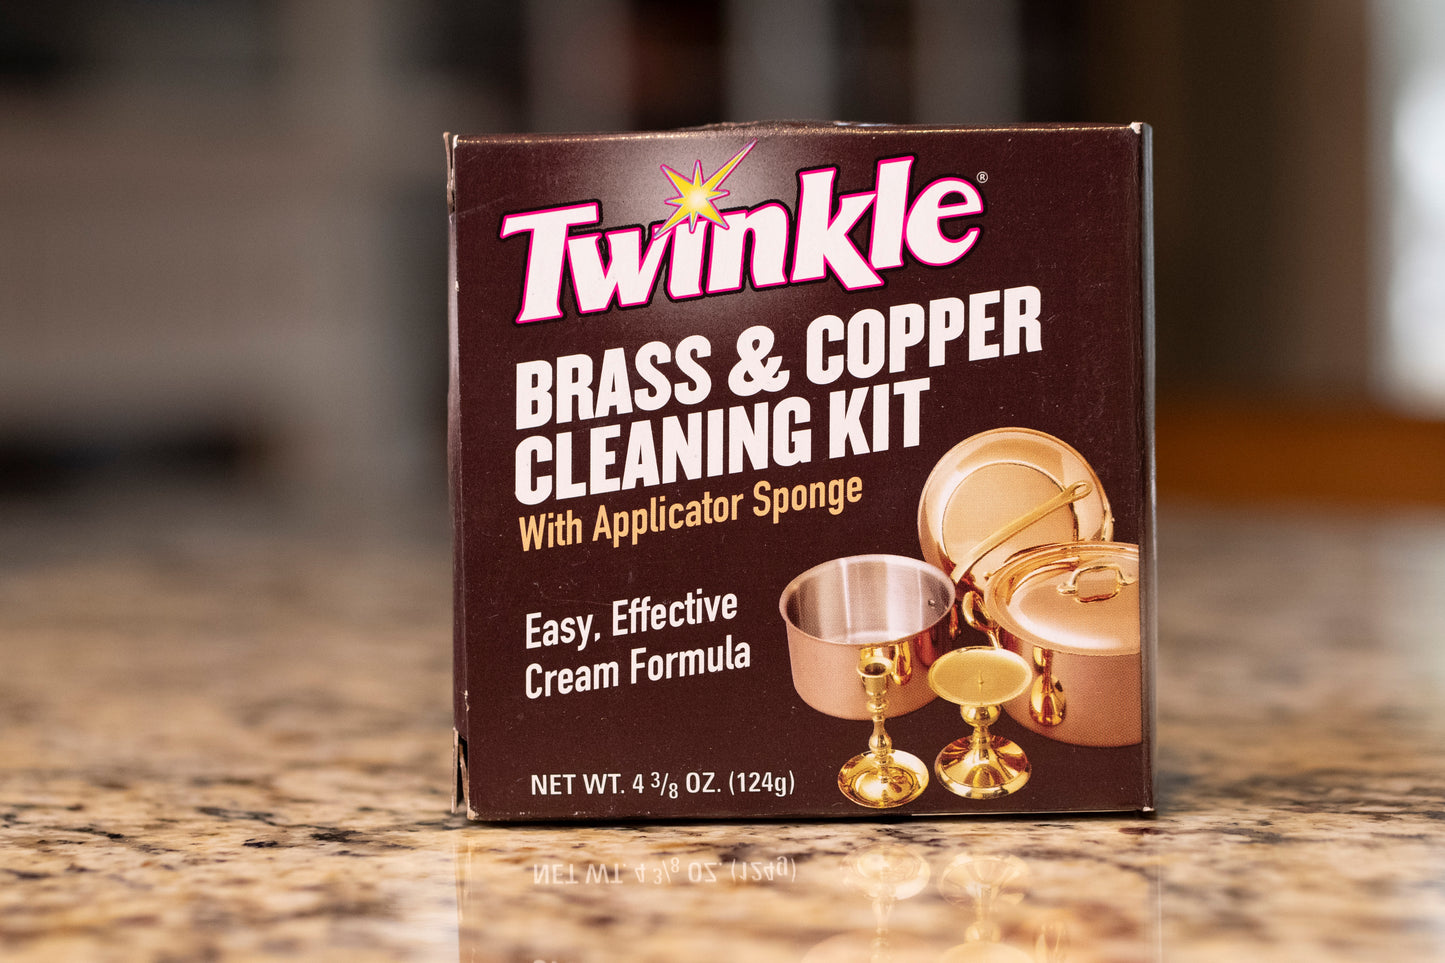 Twinkle 525105 Brass and Copper Cleaning Kit, 4.4 oz, Pas